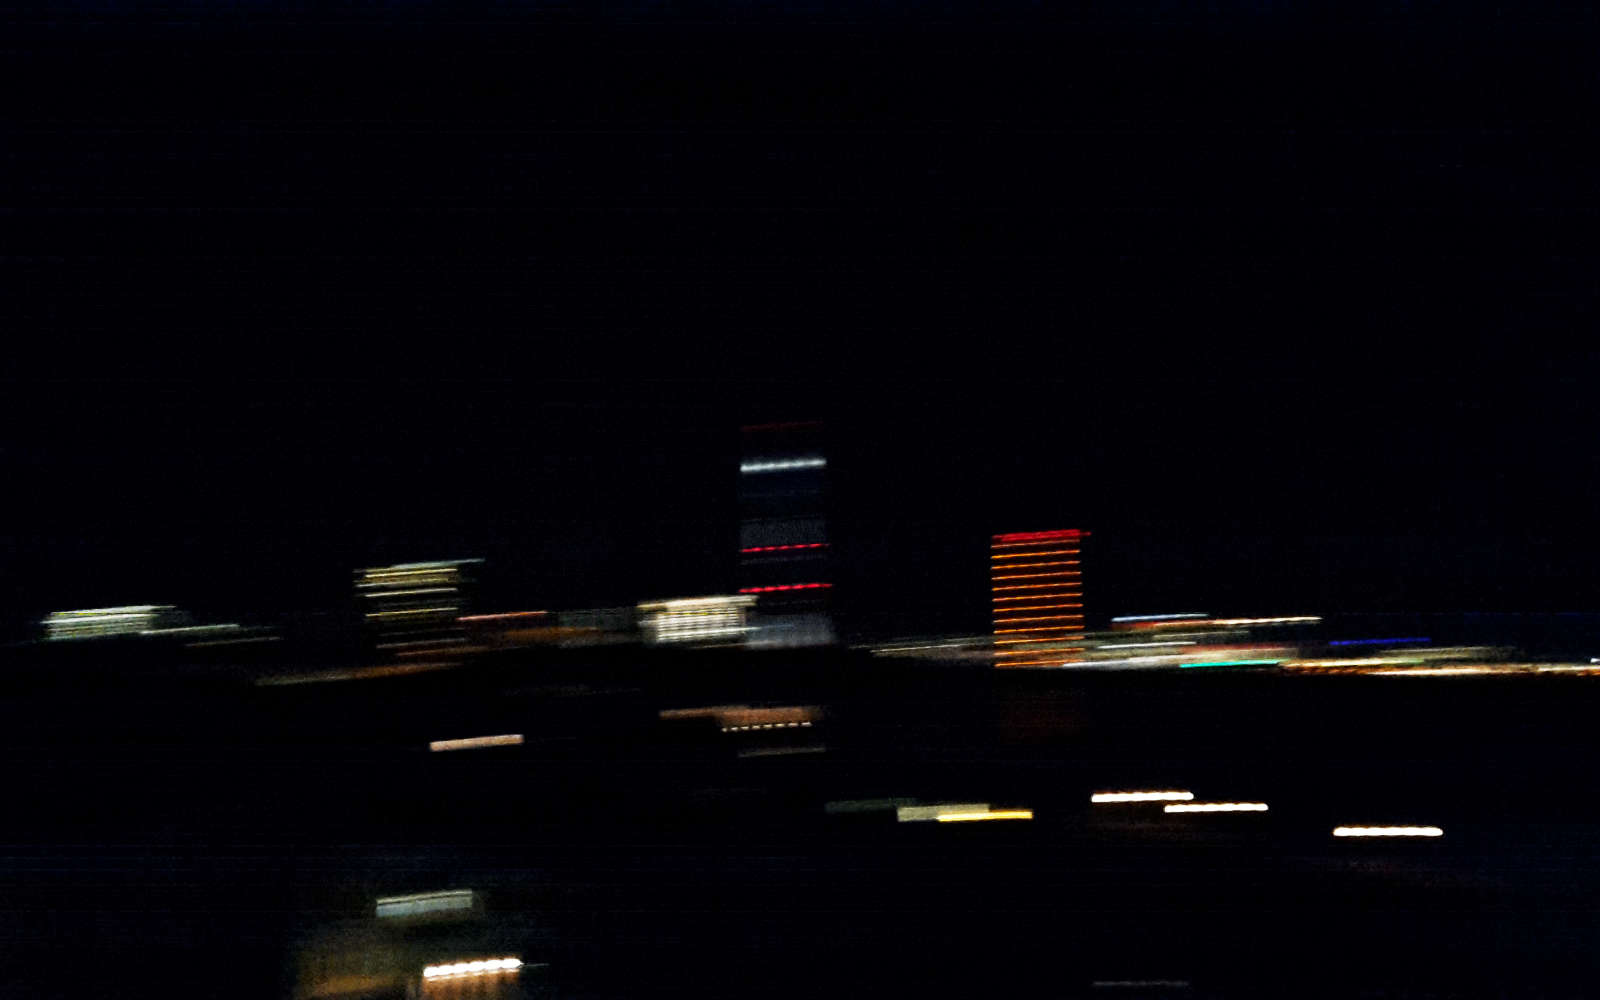 blurred photograph of düsseldorf skyline at night showing the lights of the bridges crossing the river rhine